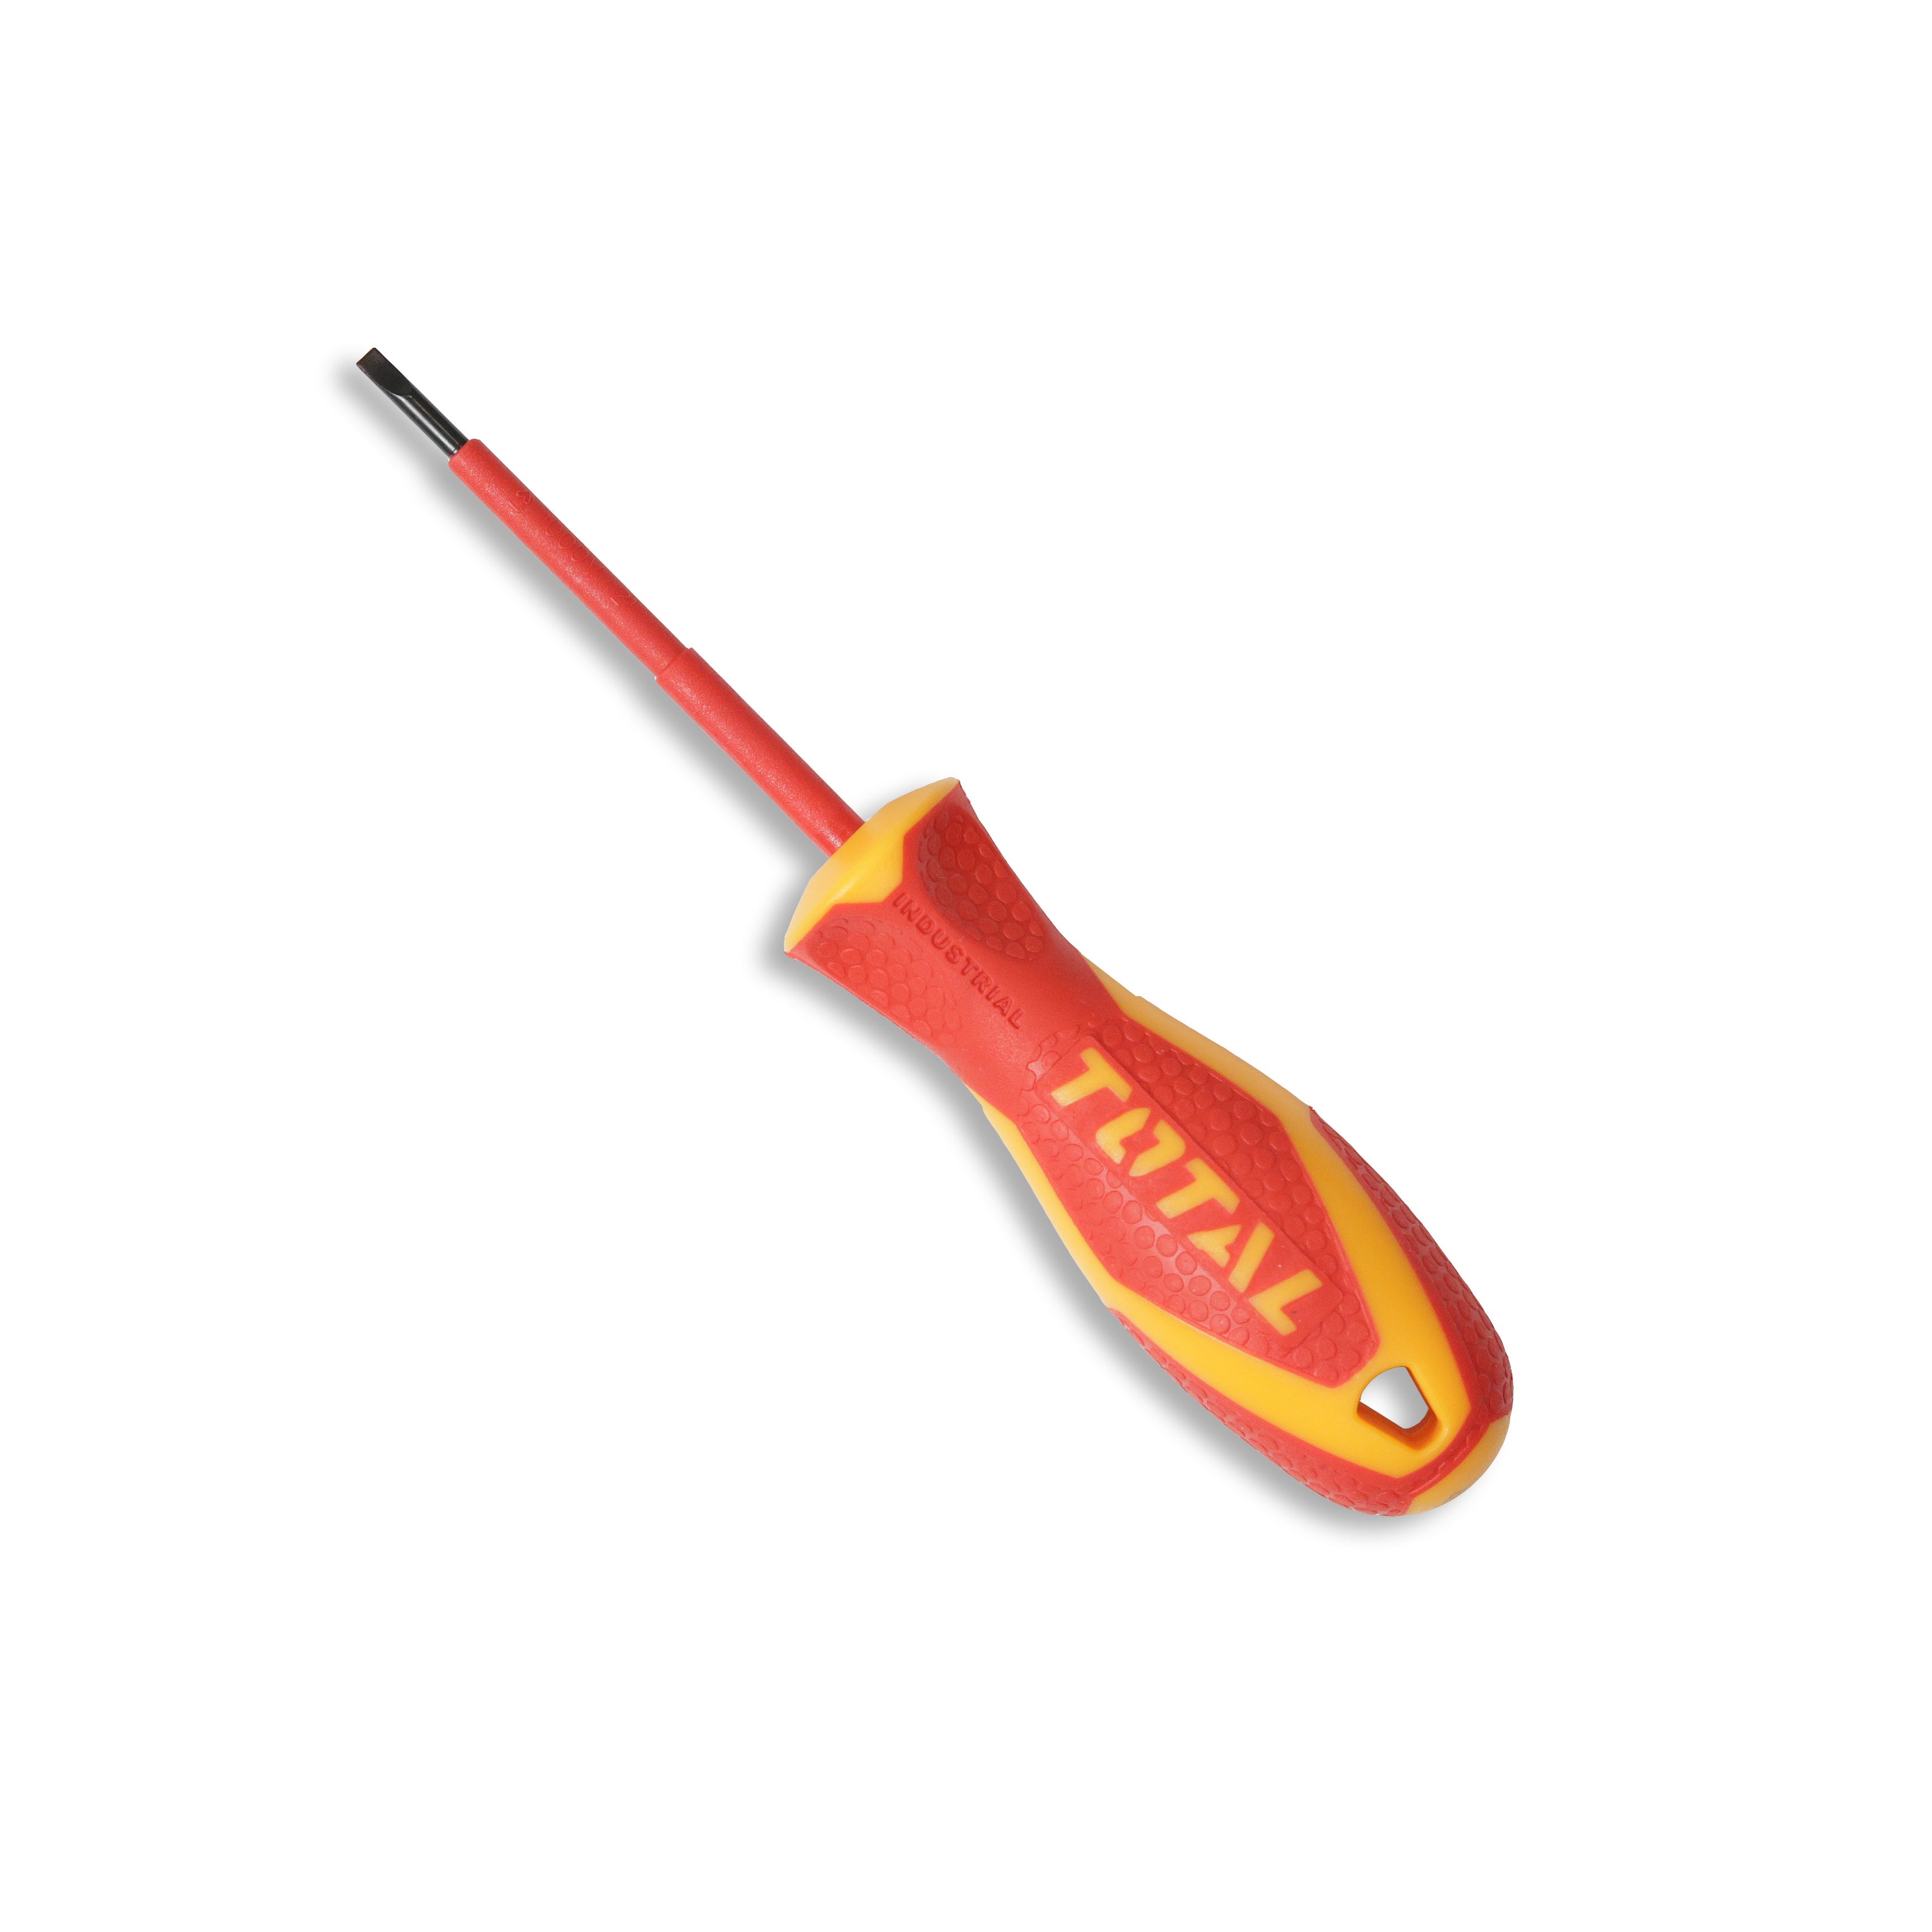 Total Insulated Screwdriver SL3.0 x 75mm THTIS3075